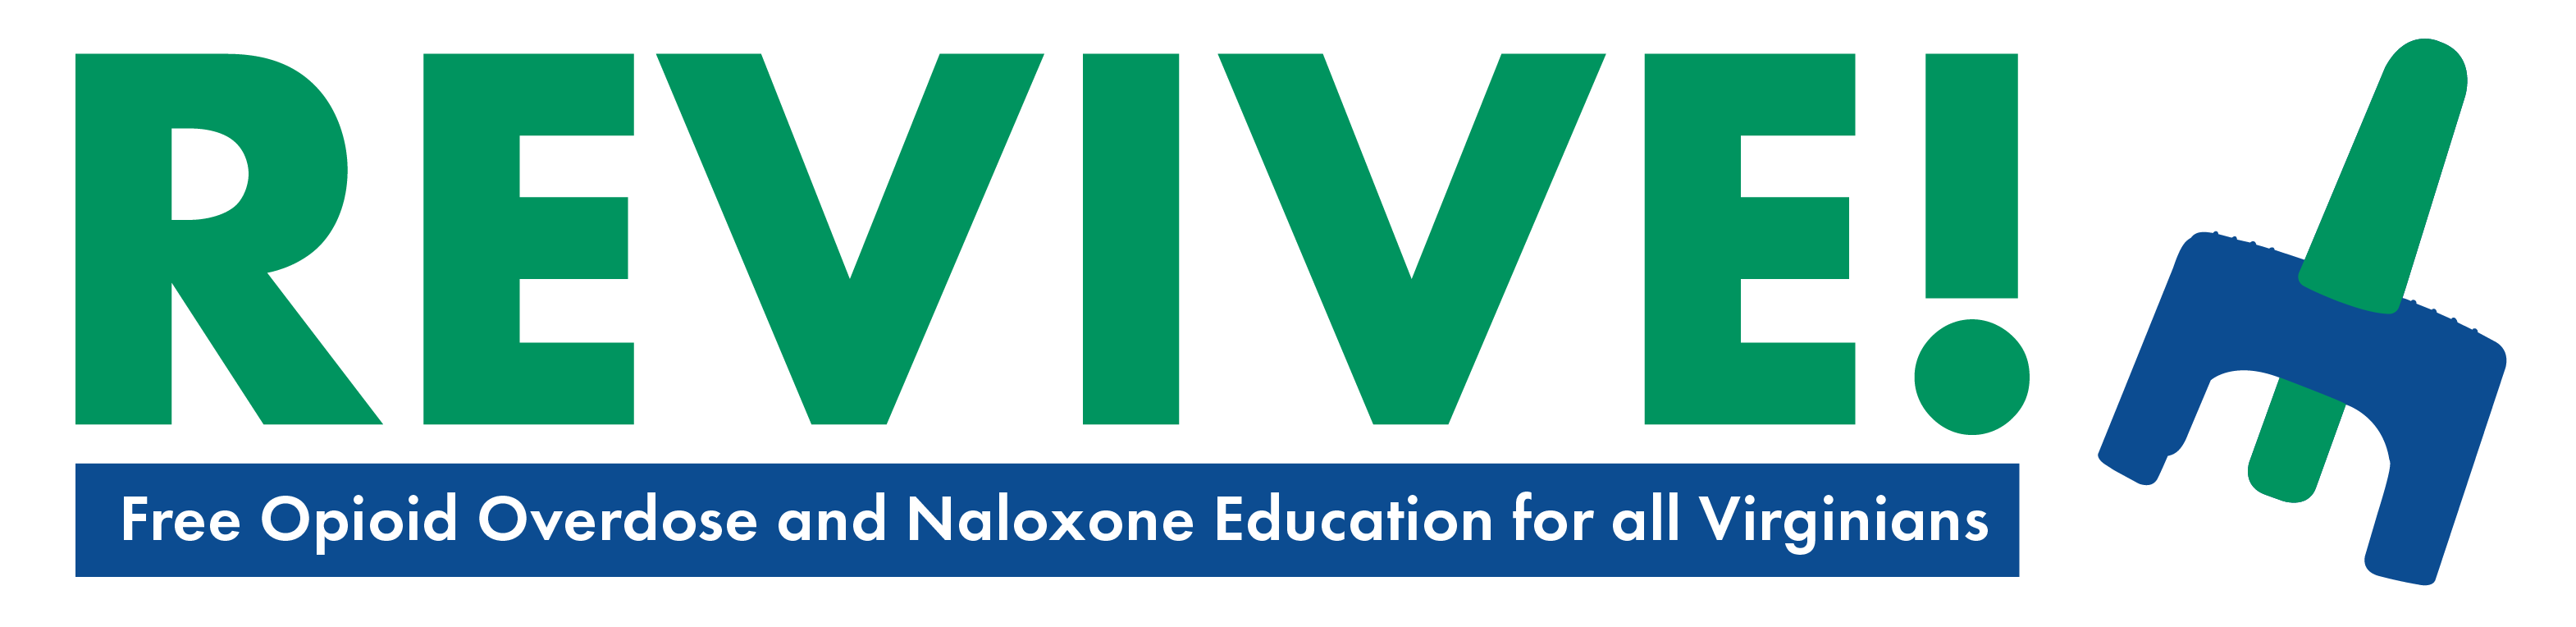 Revive: Free Opioid Overdose and Naloxone Education for all Virginians logo